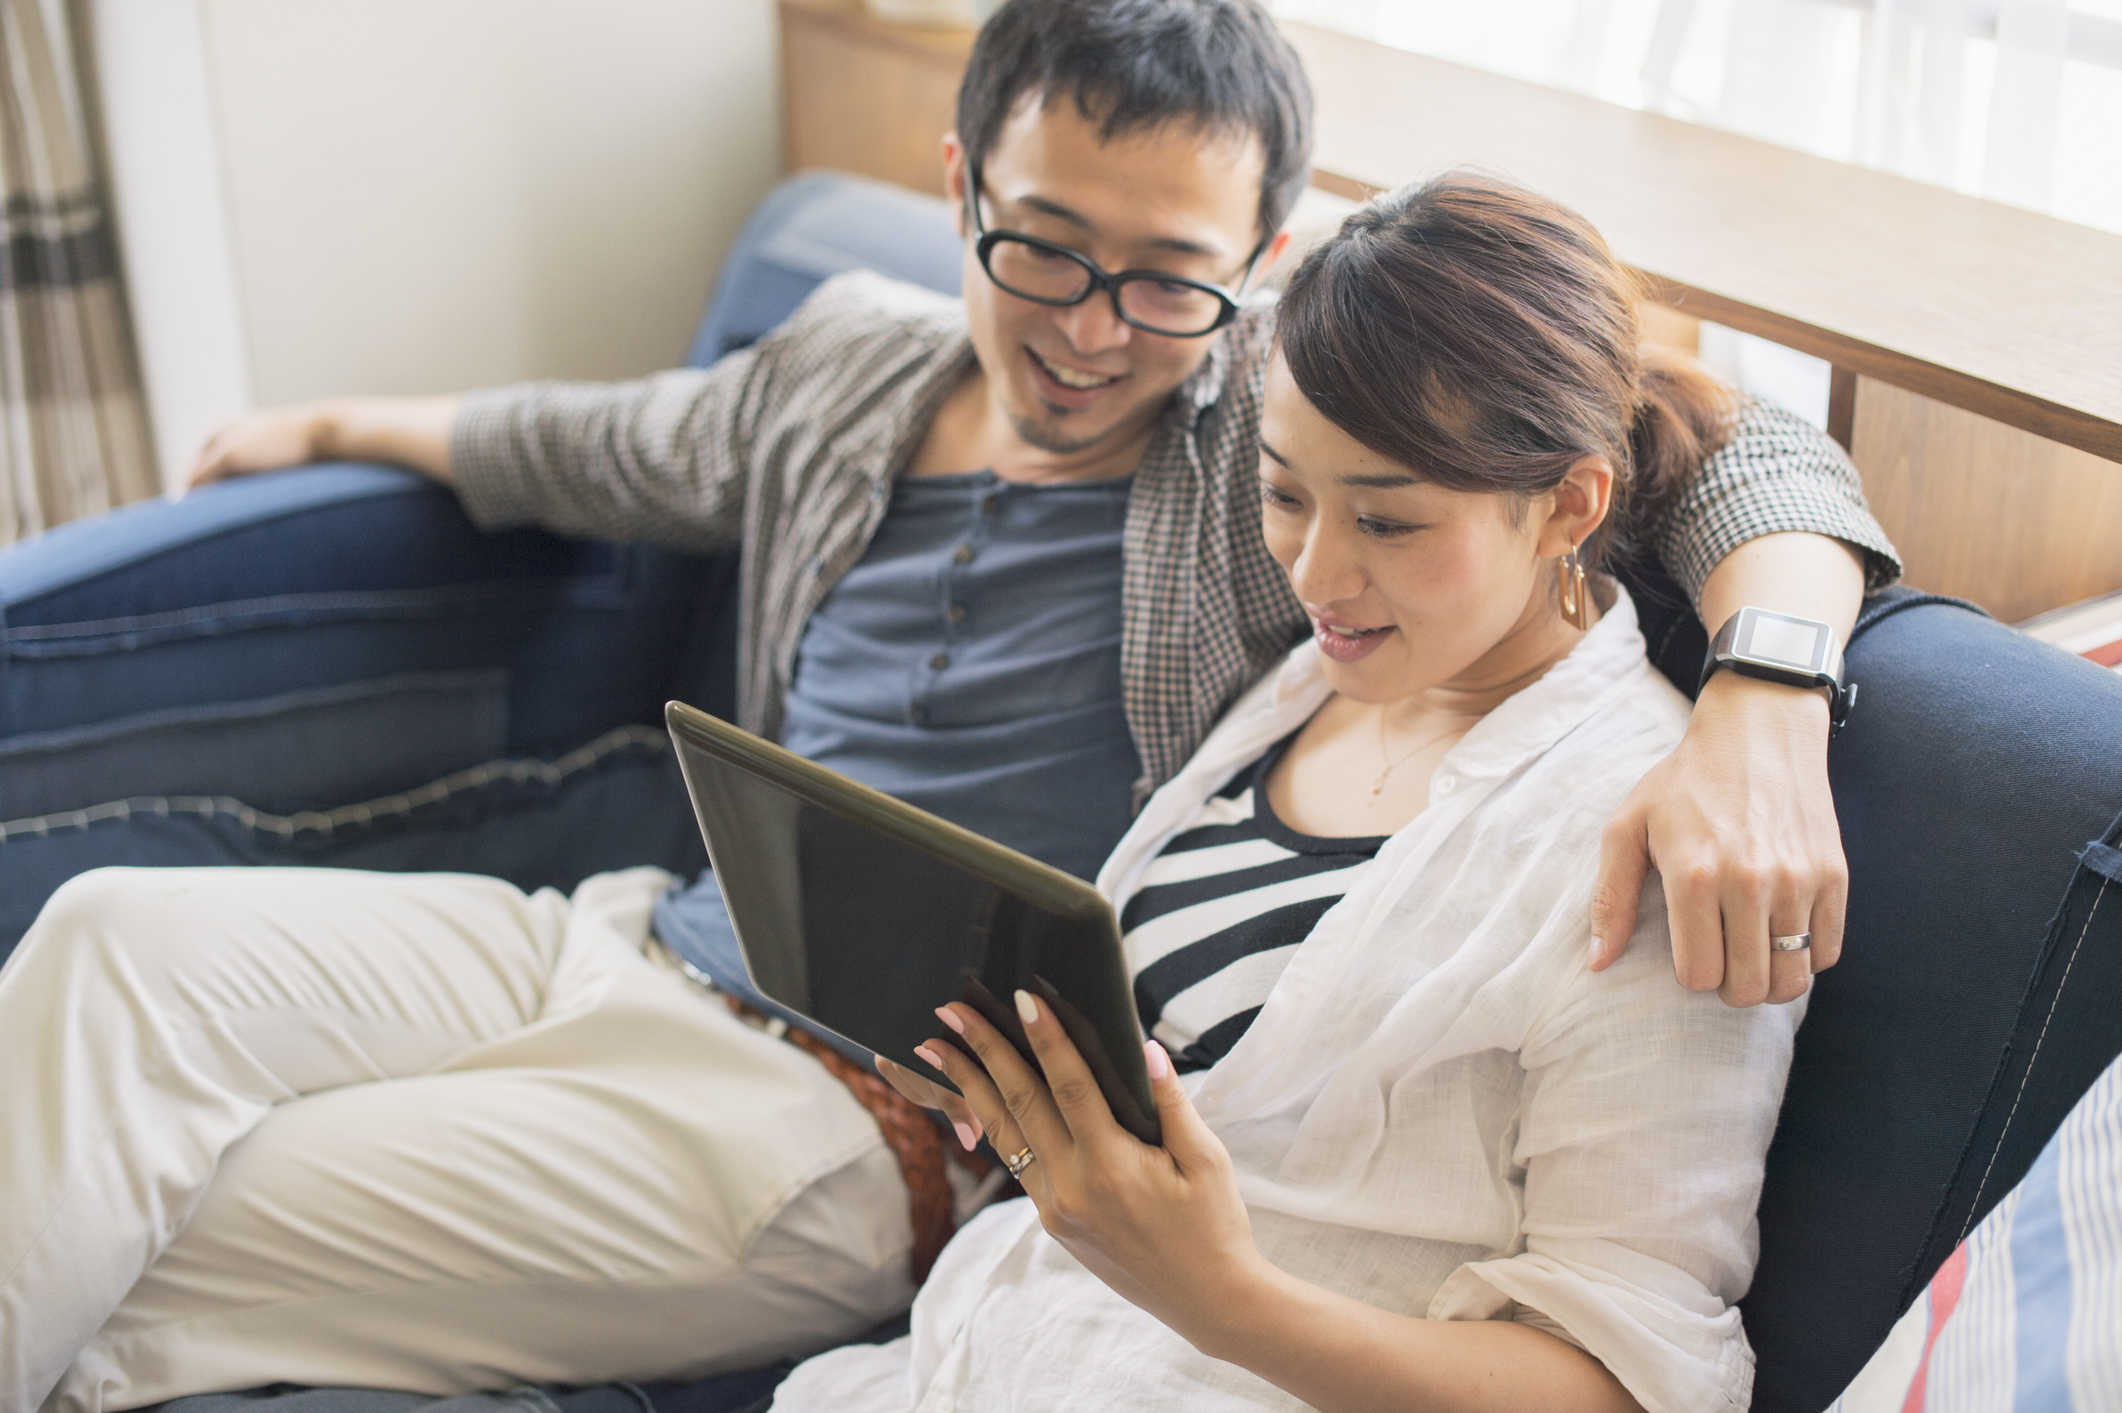 Stock Photo of Man and Woman Looking At a Tablet And Smiling